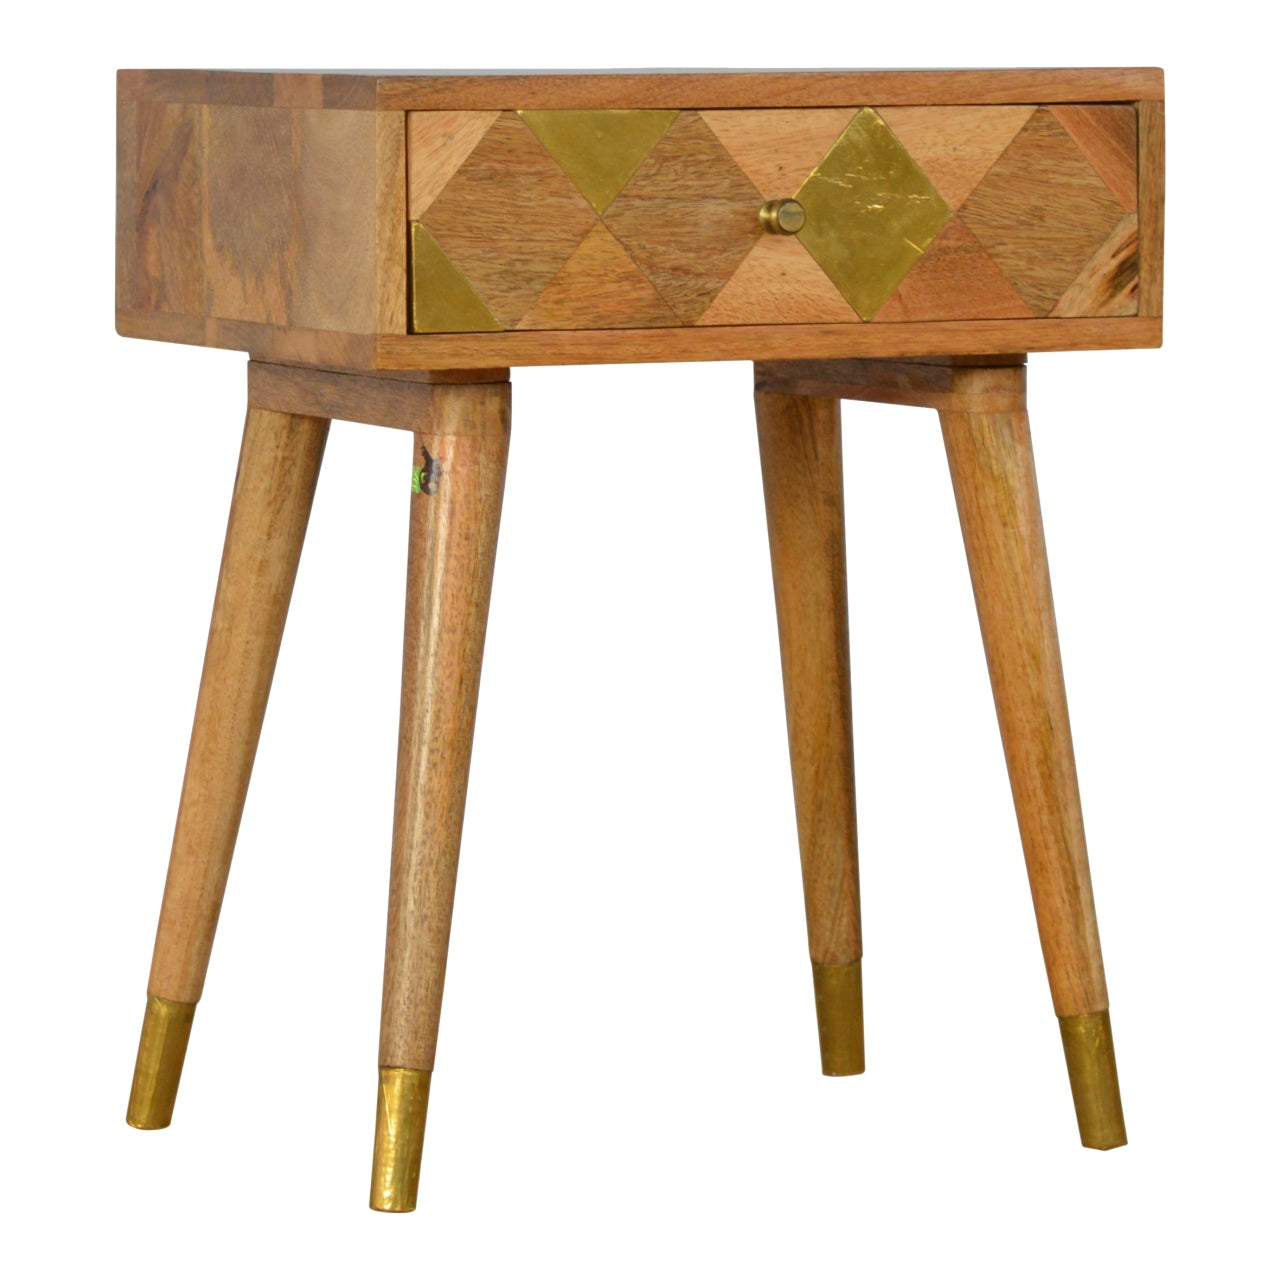 Oak-ish Gold Brass Inlay and Wood Bedside Table